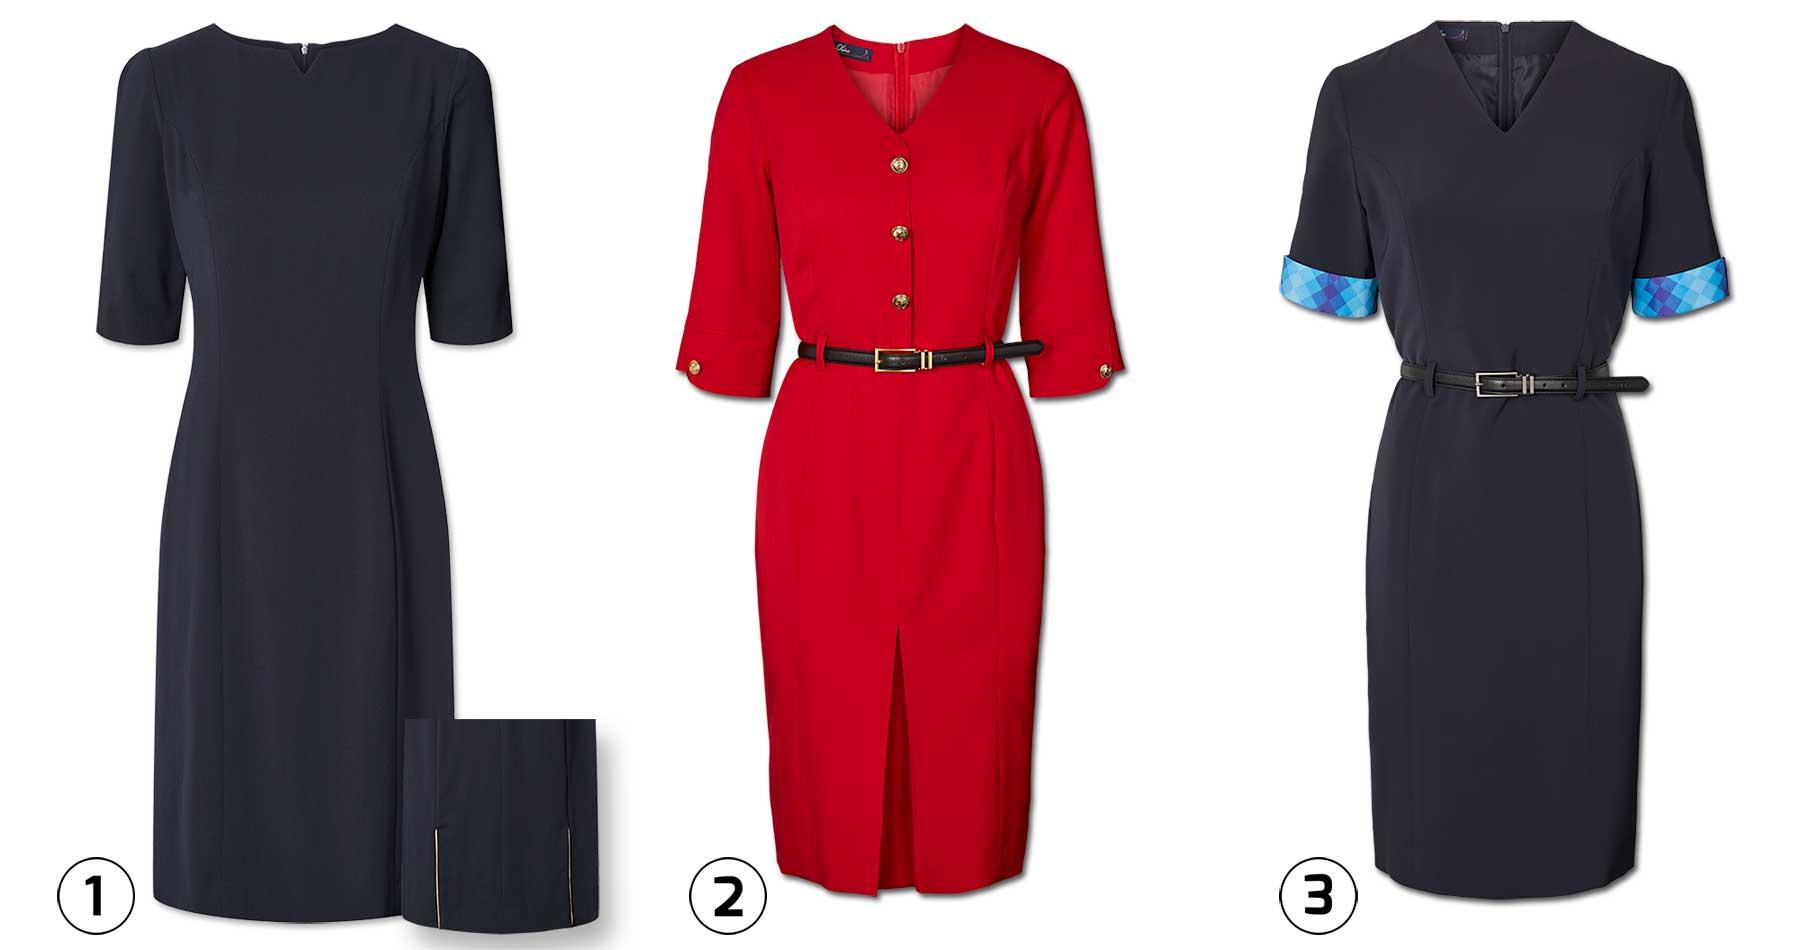 Cabin crew dresses for Iceland air and Jazeera together with a red flight attendant dress with golden buttons